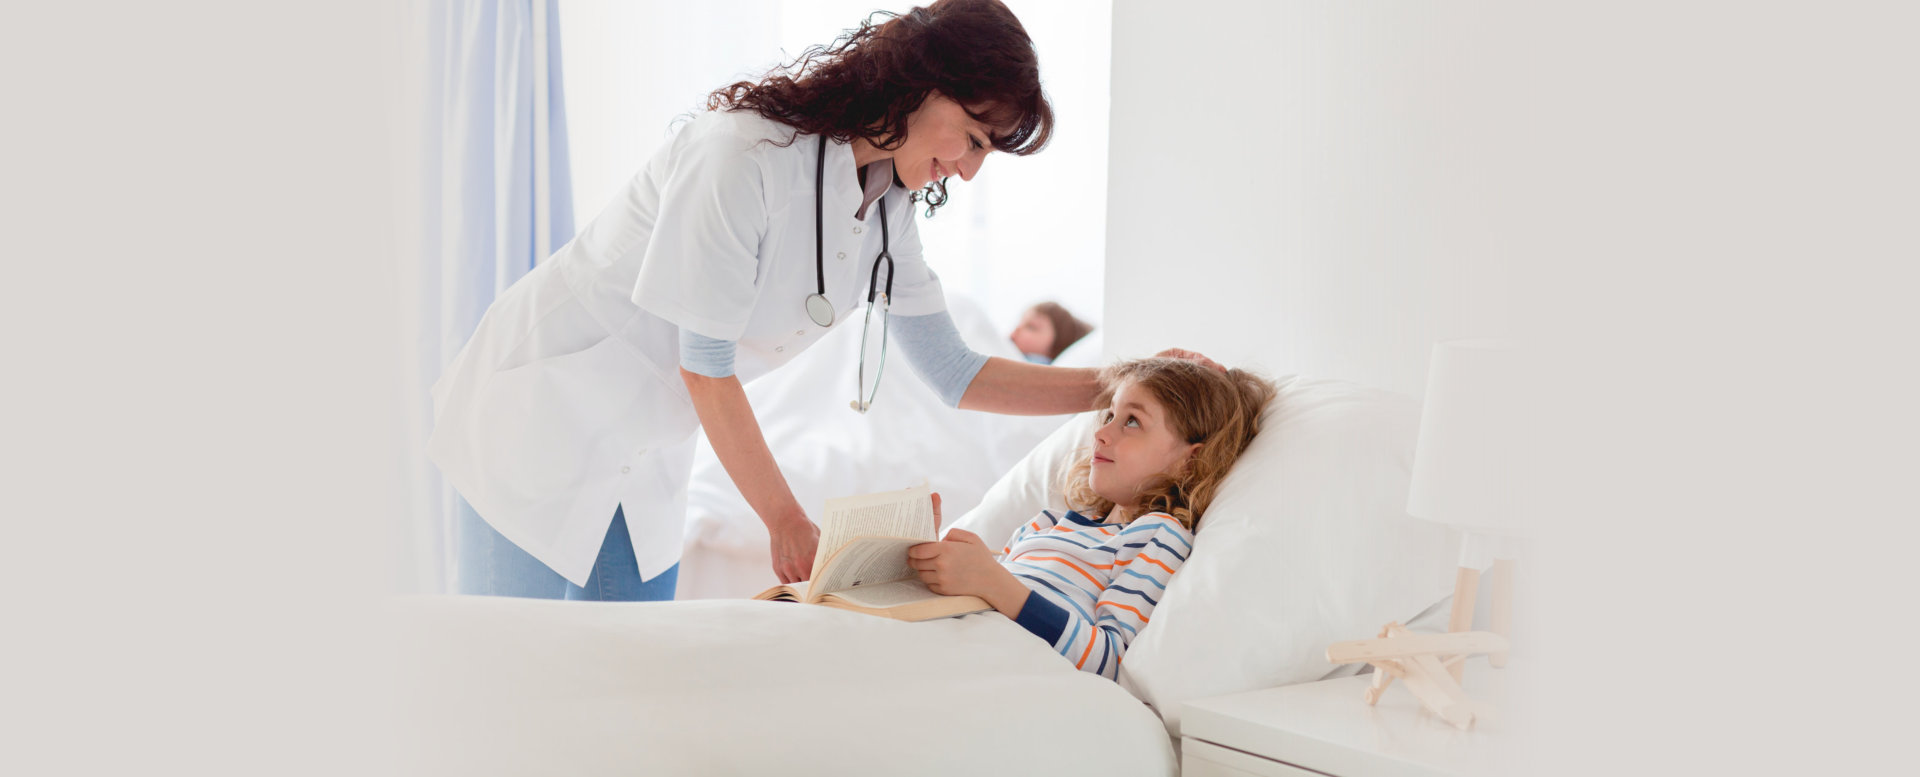 Caring young nurse looking after little sick girl